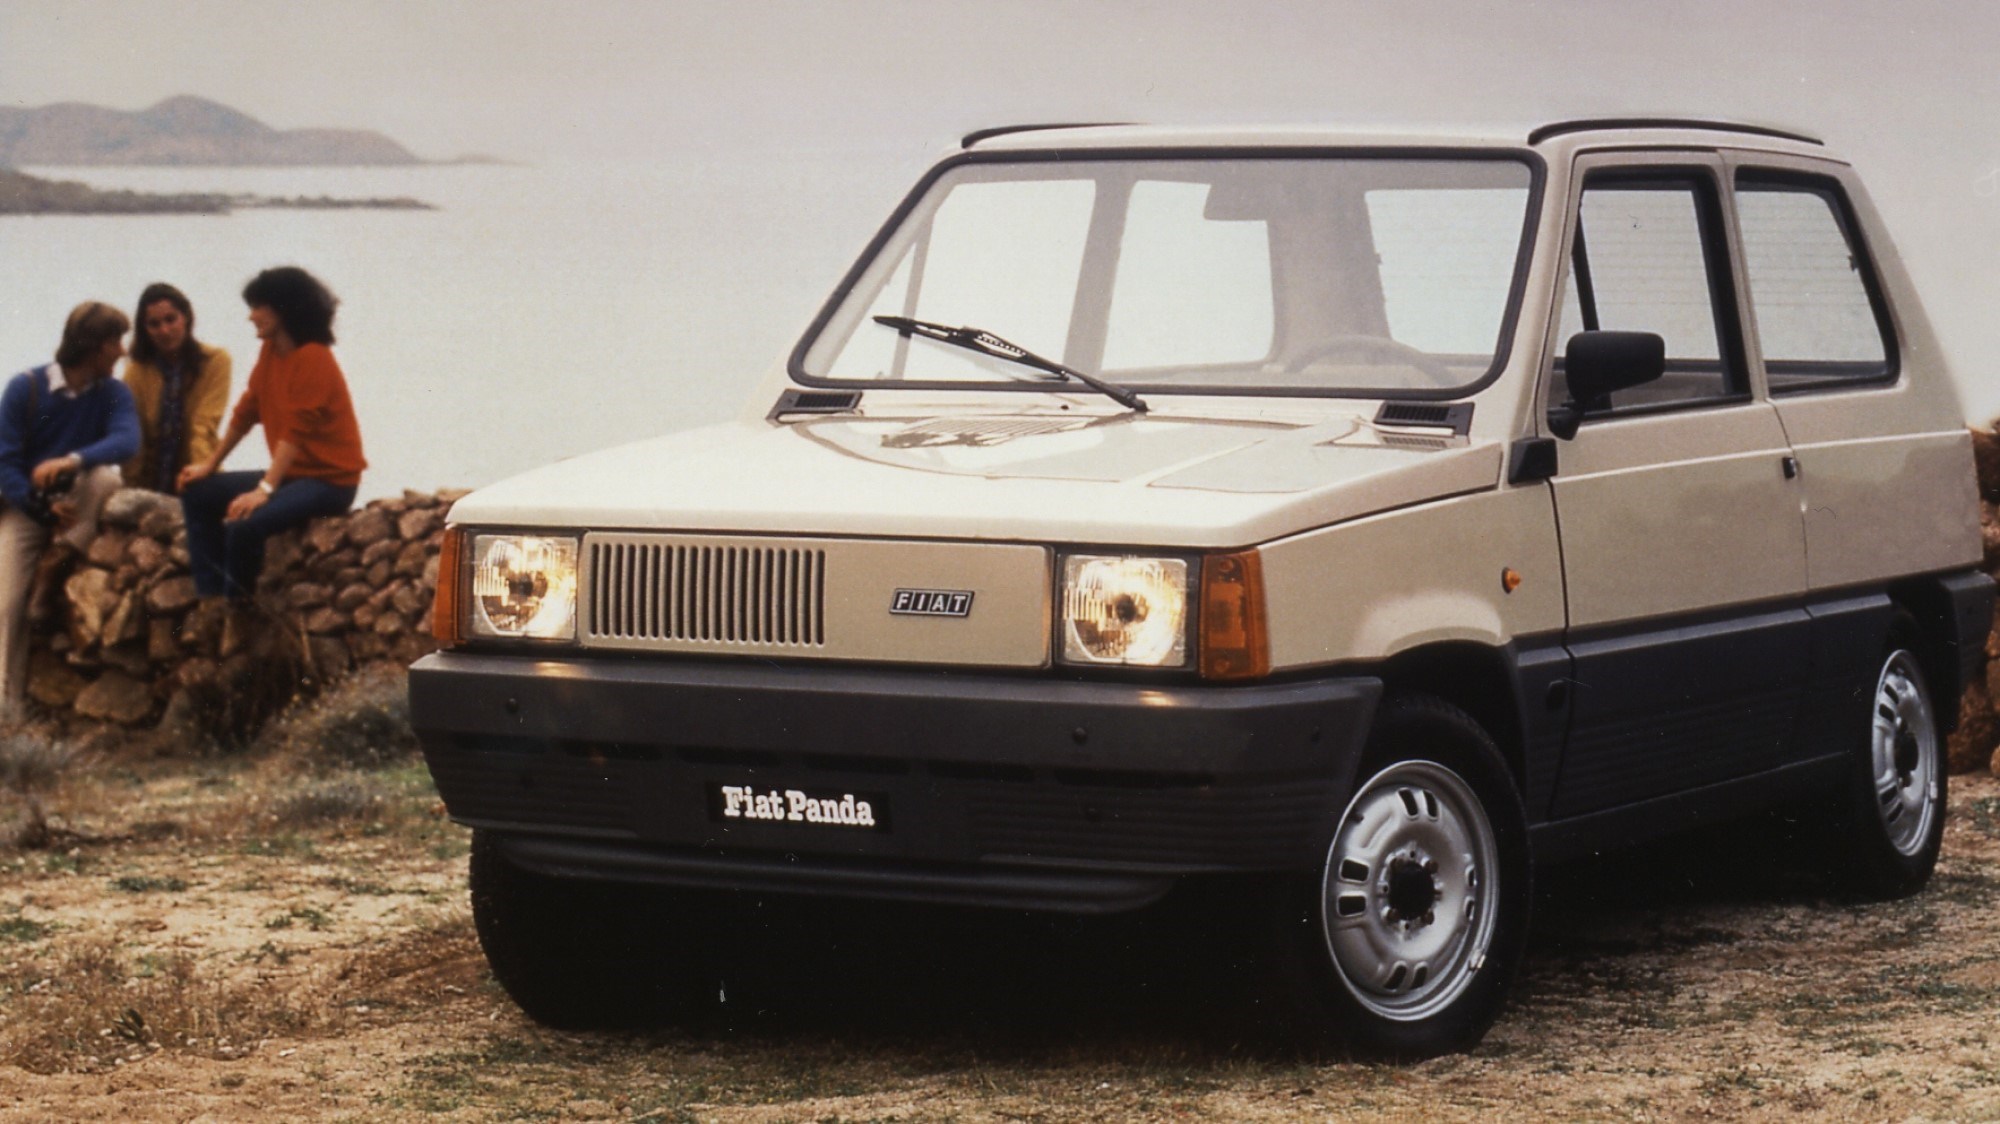 When was the Fiat Panda unveiled?